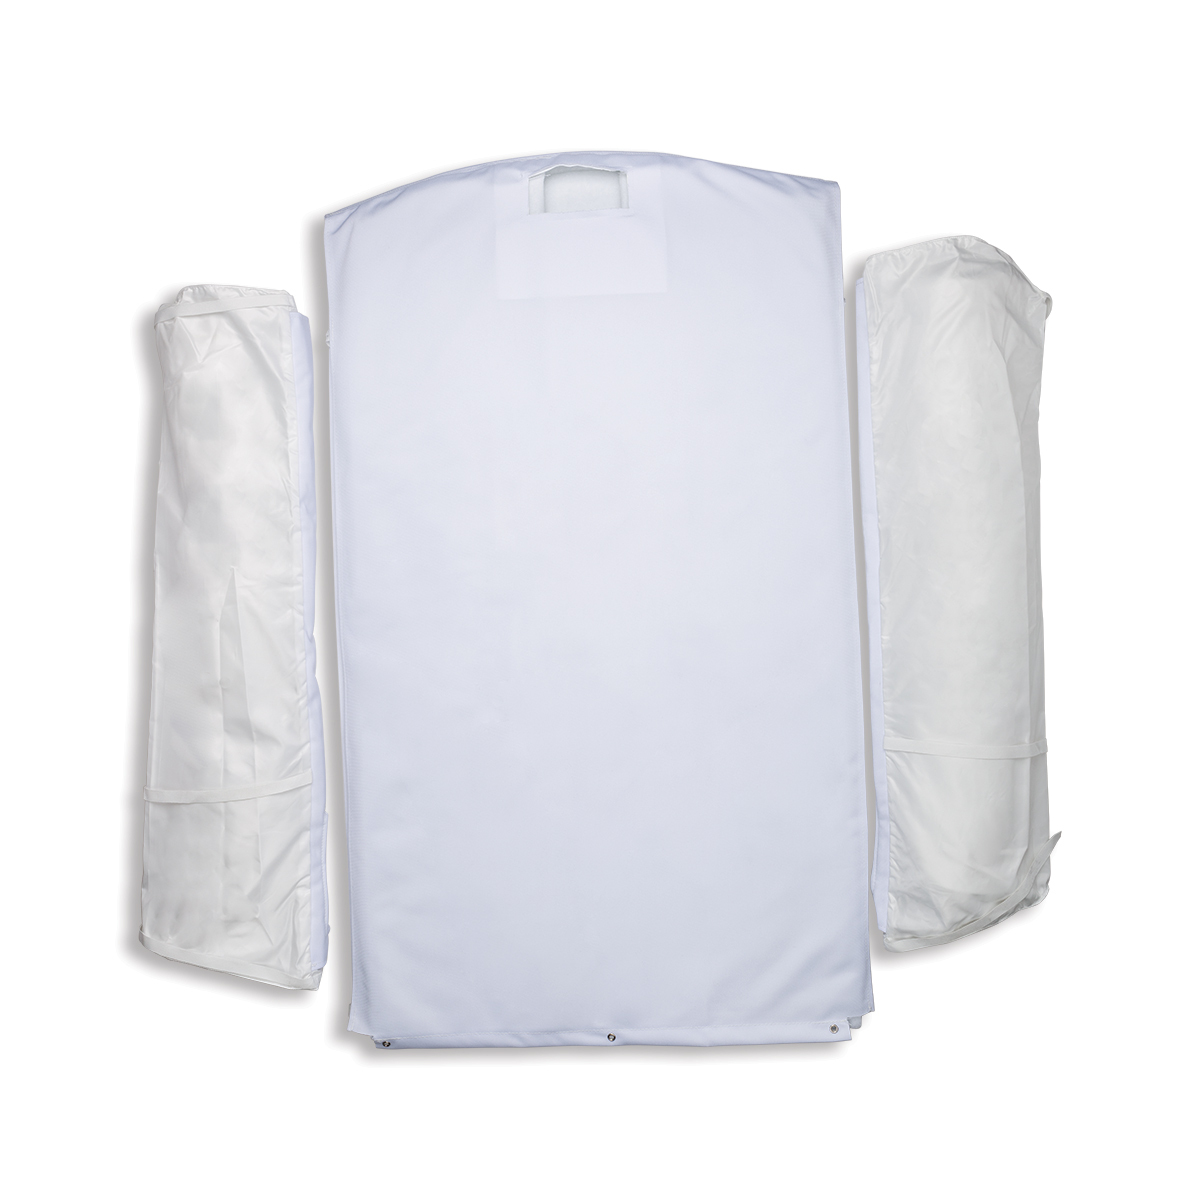 Itsumi Body Cover W/50 oz. Flannel & Side Air Bags (Set) | Cleaner's Supply